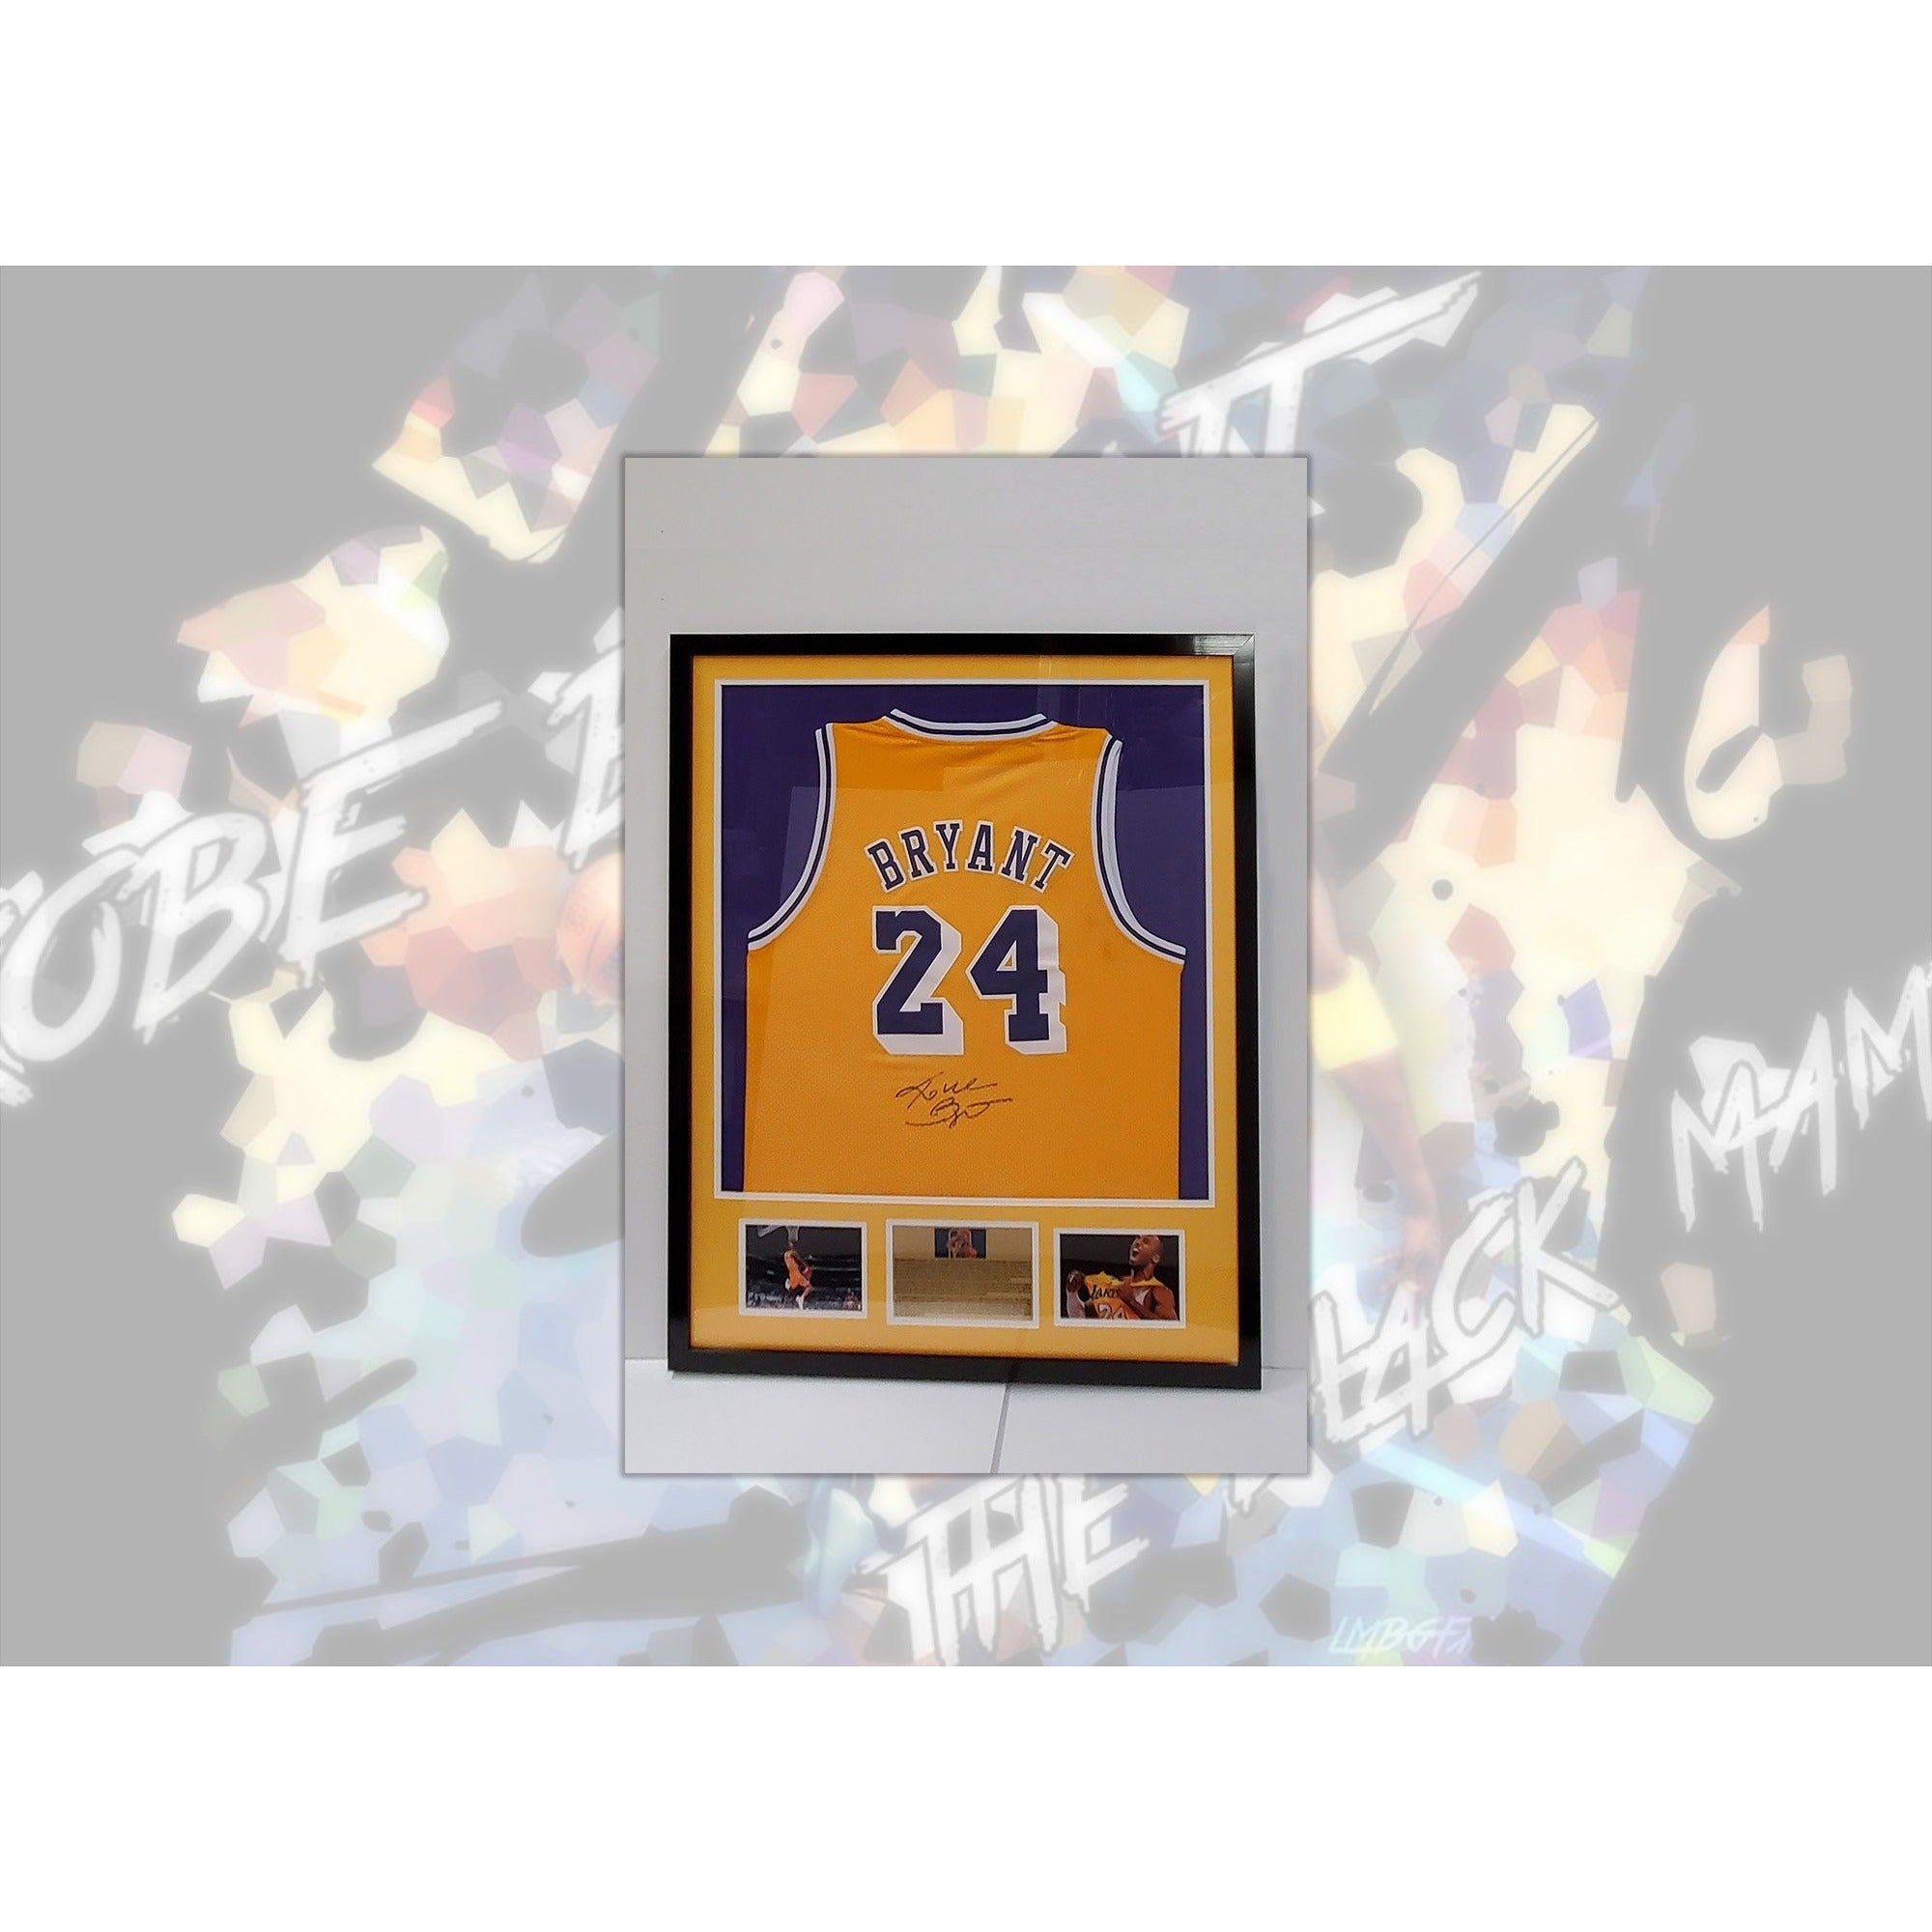 Kobe Bryant Los Angeles Lakers framed and signed authentic jersey with proof